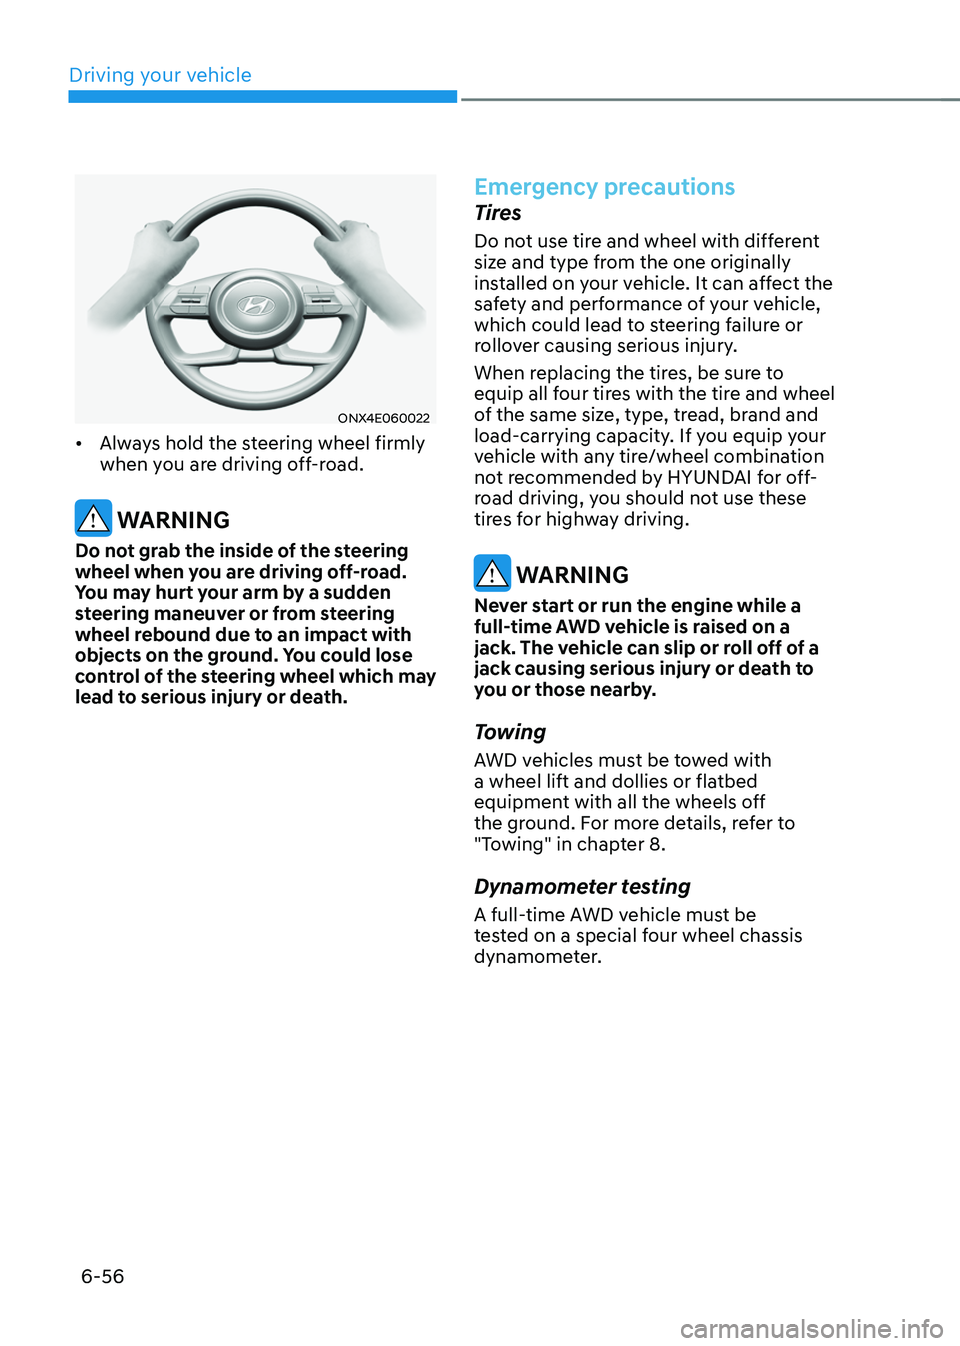 HYUNDAI TUCSON 2022  Owners Manual Driving your vehicle
6-56
ONX4E060022
•	Always hold the steering wheel firmly 
when you are driving off-road. 
 WARNING
Do not grab the inside of the steering 
wheel when you are driving off-road. 
